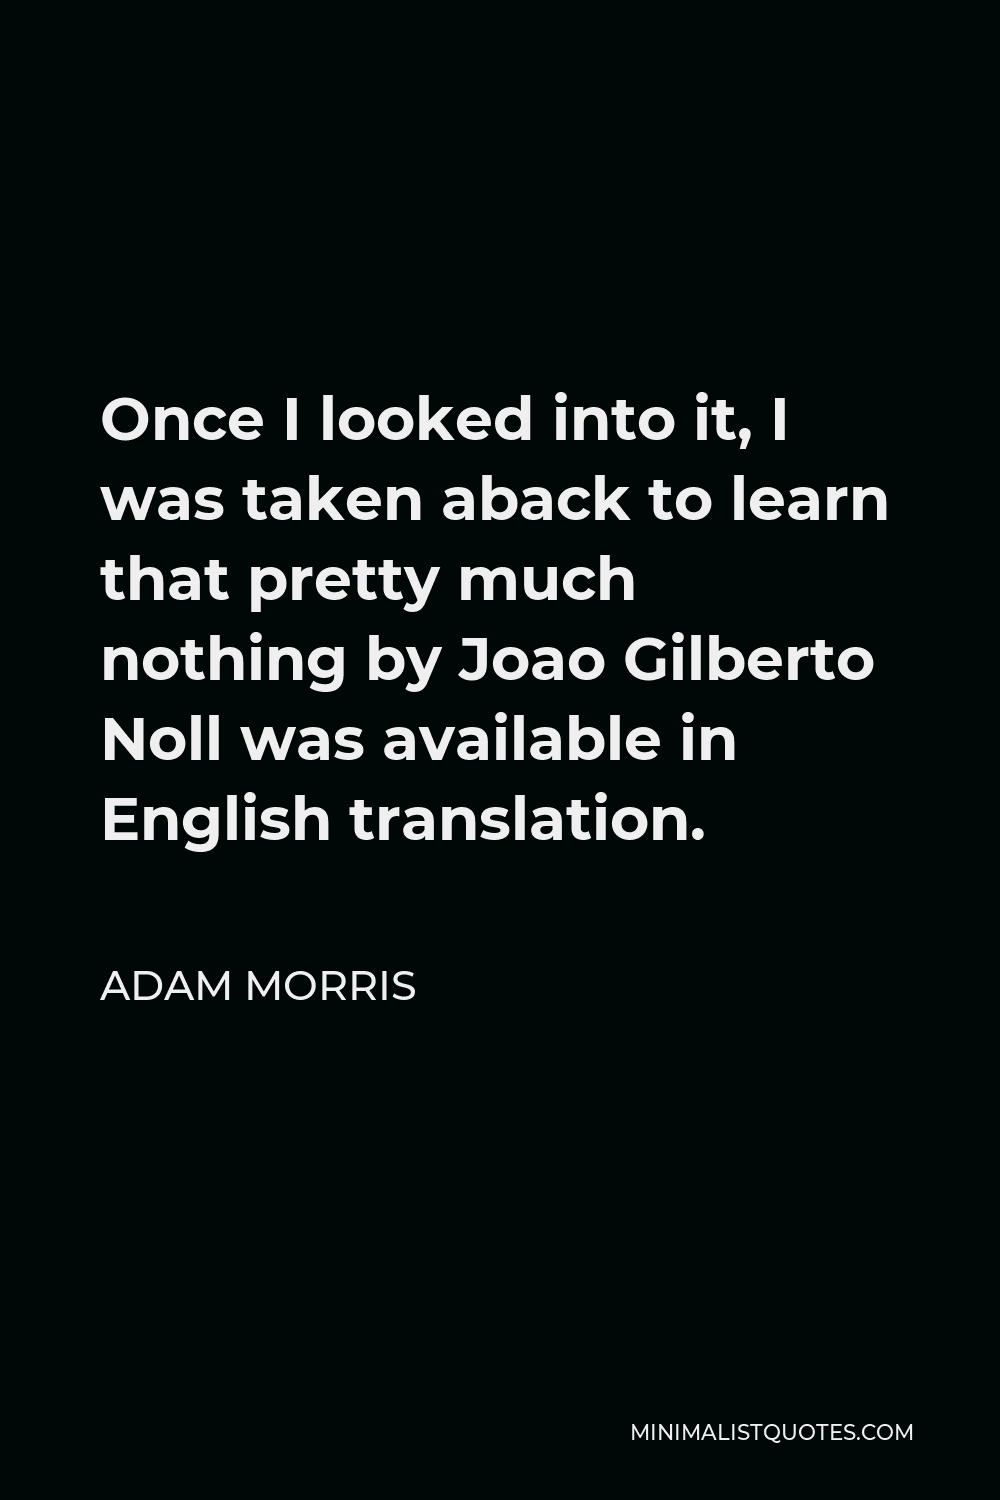 Adam Morris Quote - Once I looked into it, I was taken aback to learn that pretty much nothing by Joao Gilberto Noll was available in English translation.